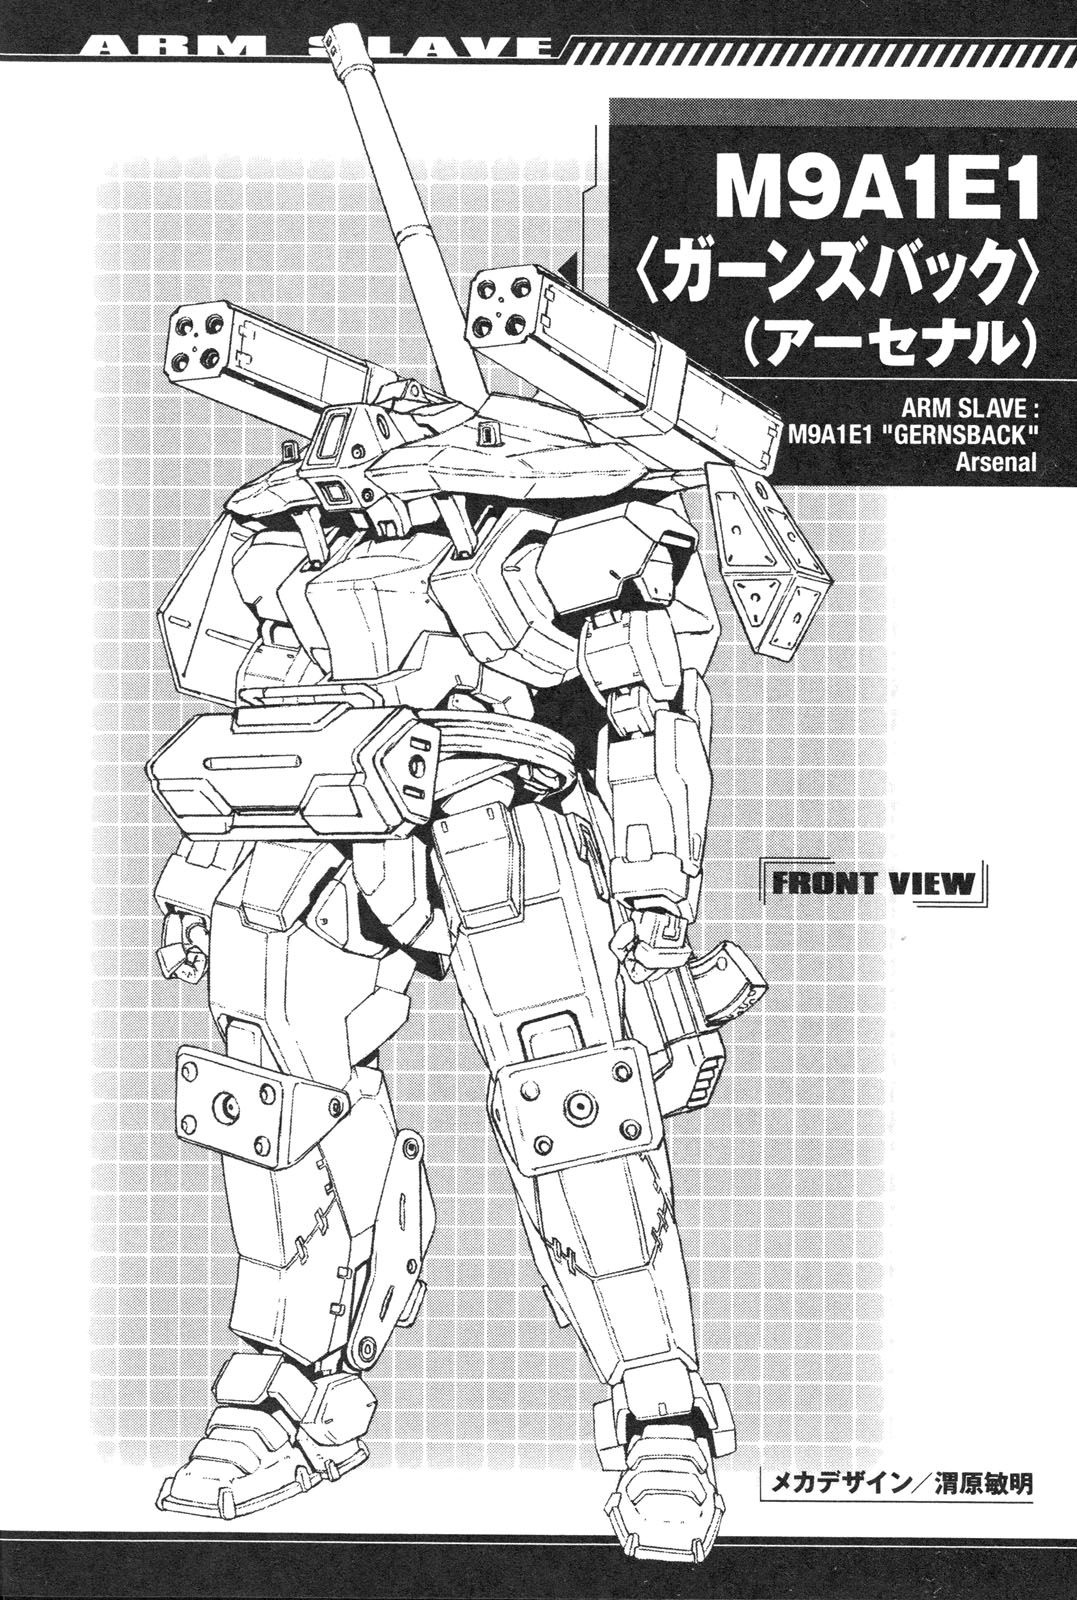 Full Metal Panic! Another Mechanical Archive (Incomplete) - 全一卷(1/3) - 4